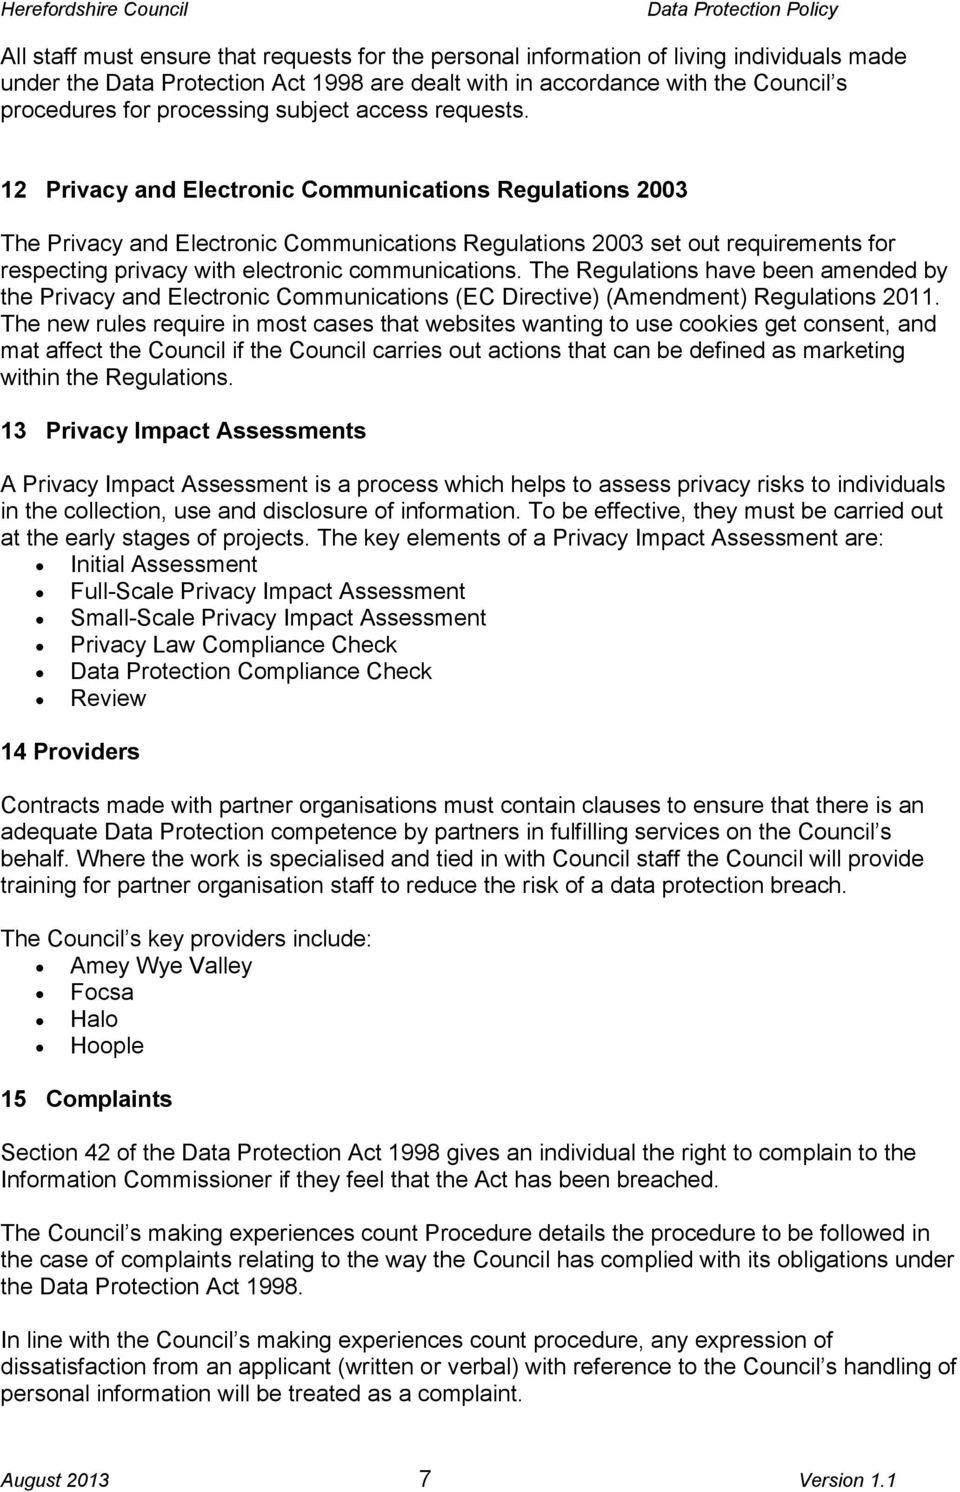 12 Privacy and Electronic Communications Regulations 2003 The Privacy and Electronic Communications Regulations 2003 set out requirements for respecting privacy with electronic communications.